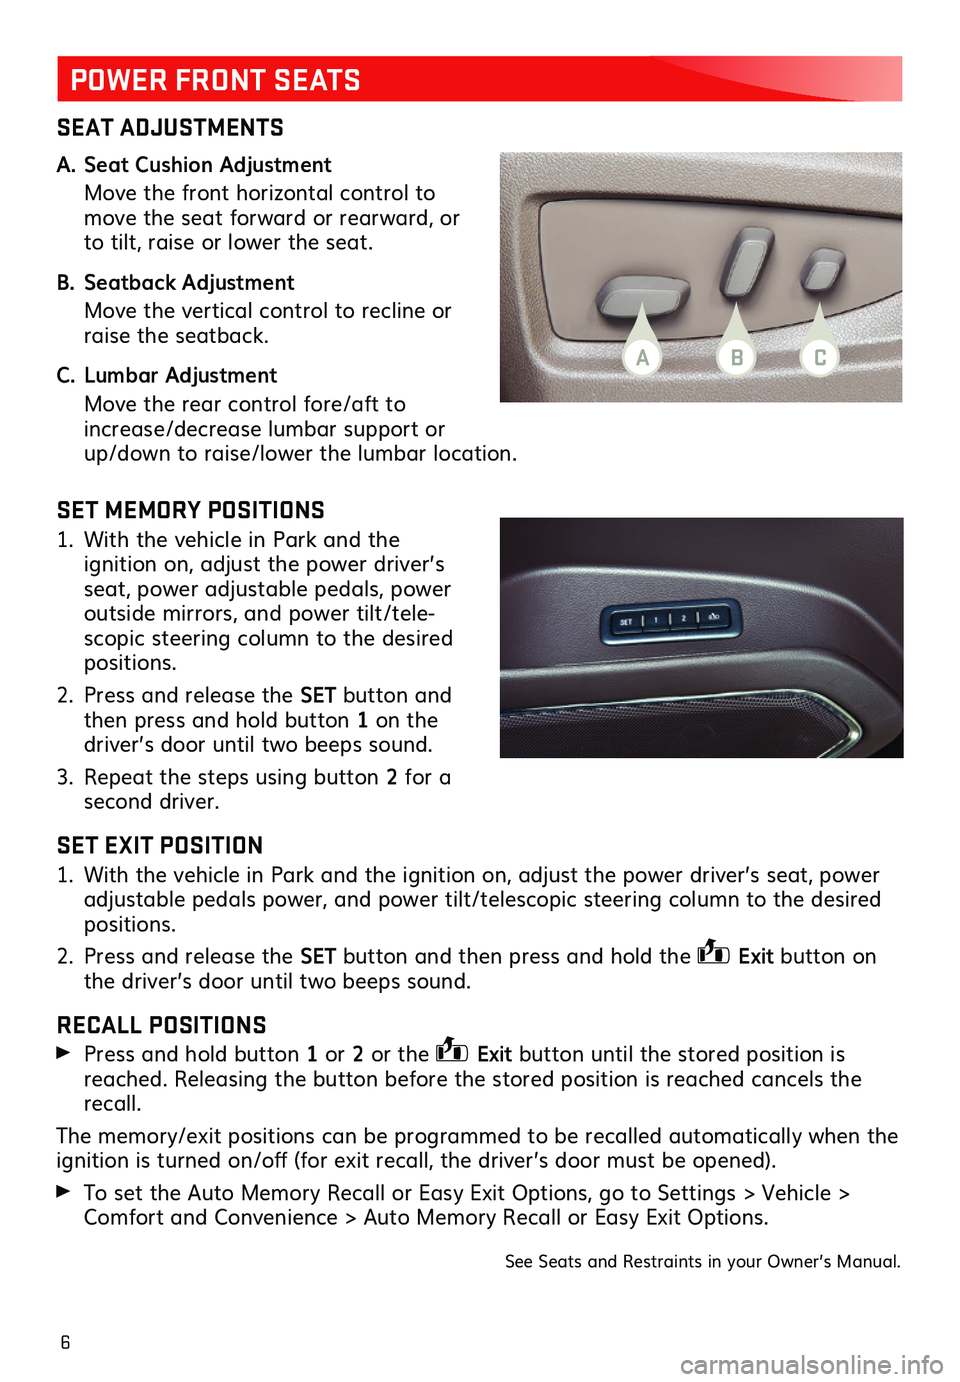 GMC YUKON XL 2019  Get To Know Guide 6
SEAT ADJUSTMENTS
A. Seat Cushion Adjustment
 Move the front horizontal control to move the seat forward or rearward, or to tilt, raise or lower the seat.
B. Seatback Adjustment
 Move the vertical co